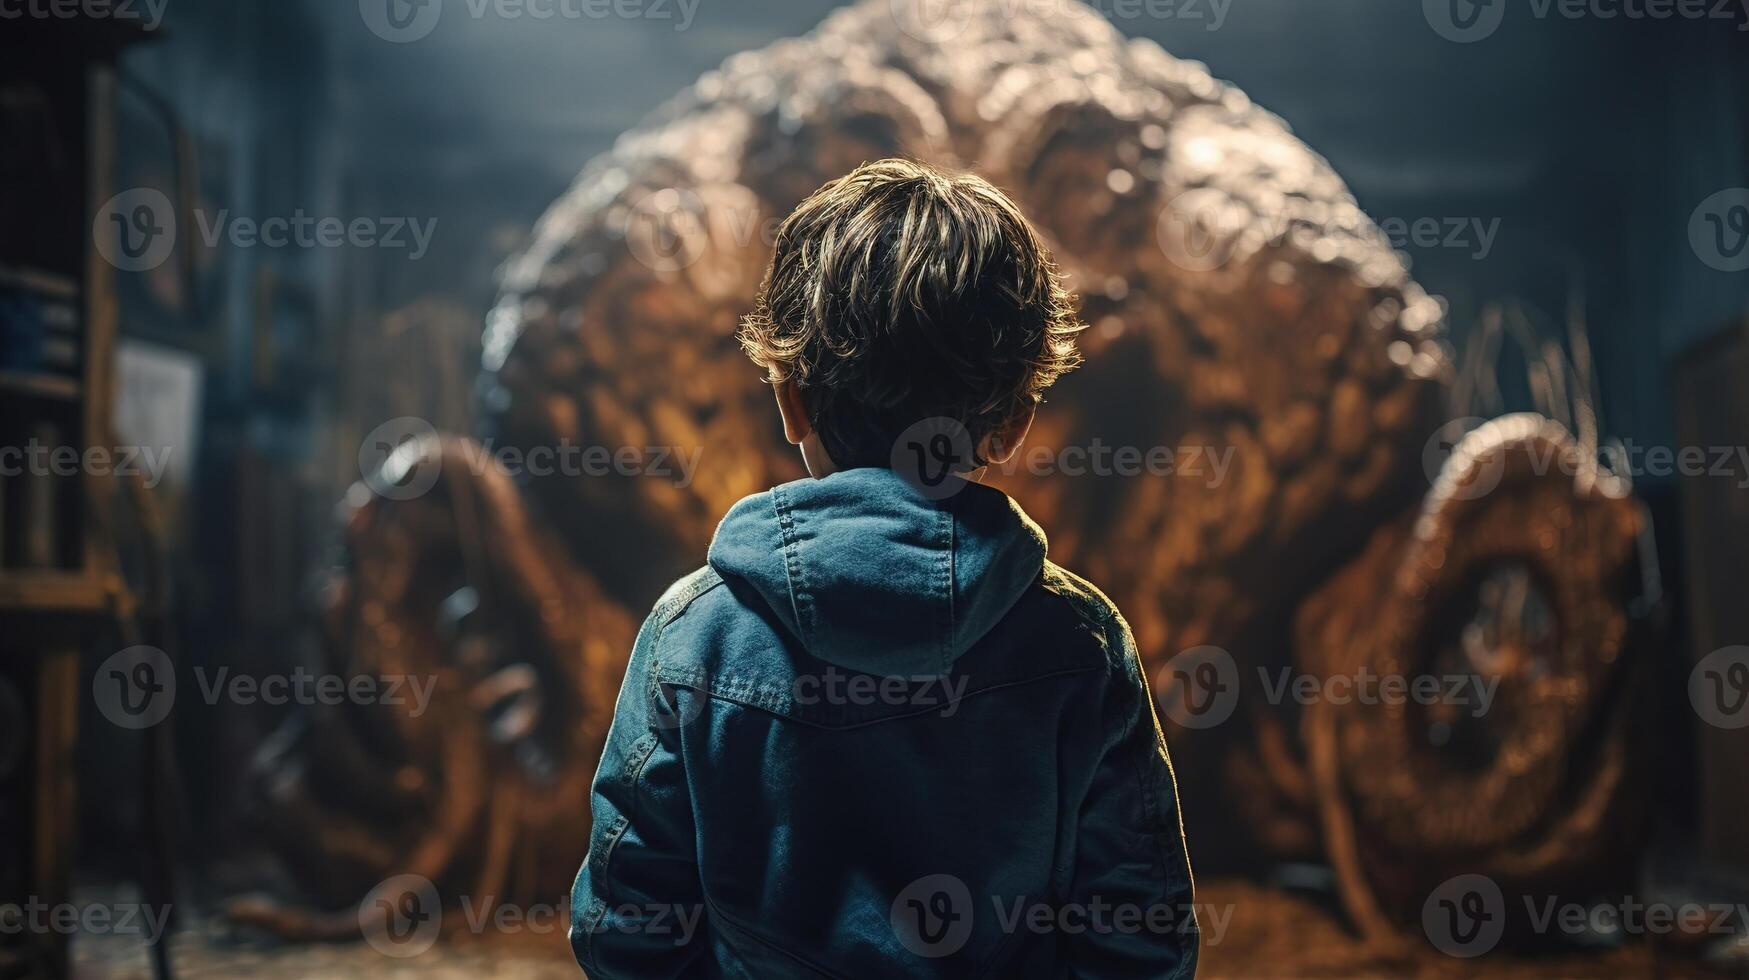 Facing Fears, Brave Kid Confronts Nightmares and Imaginary Monsters. photo